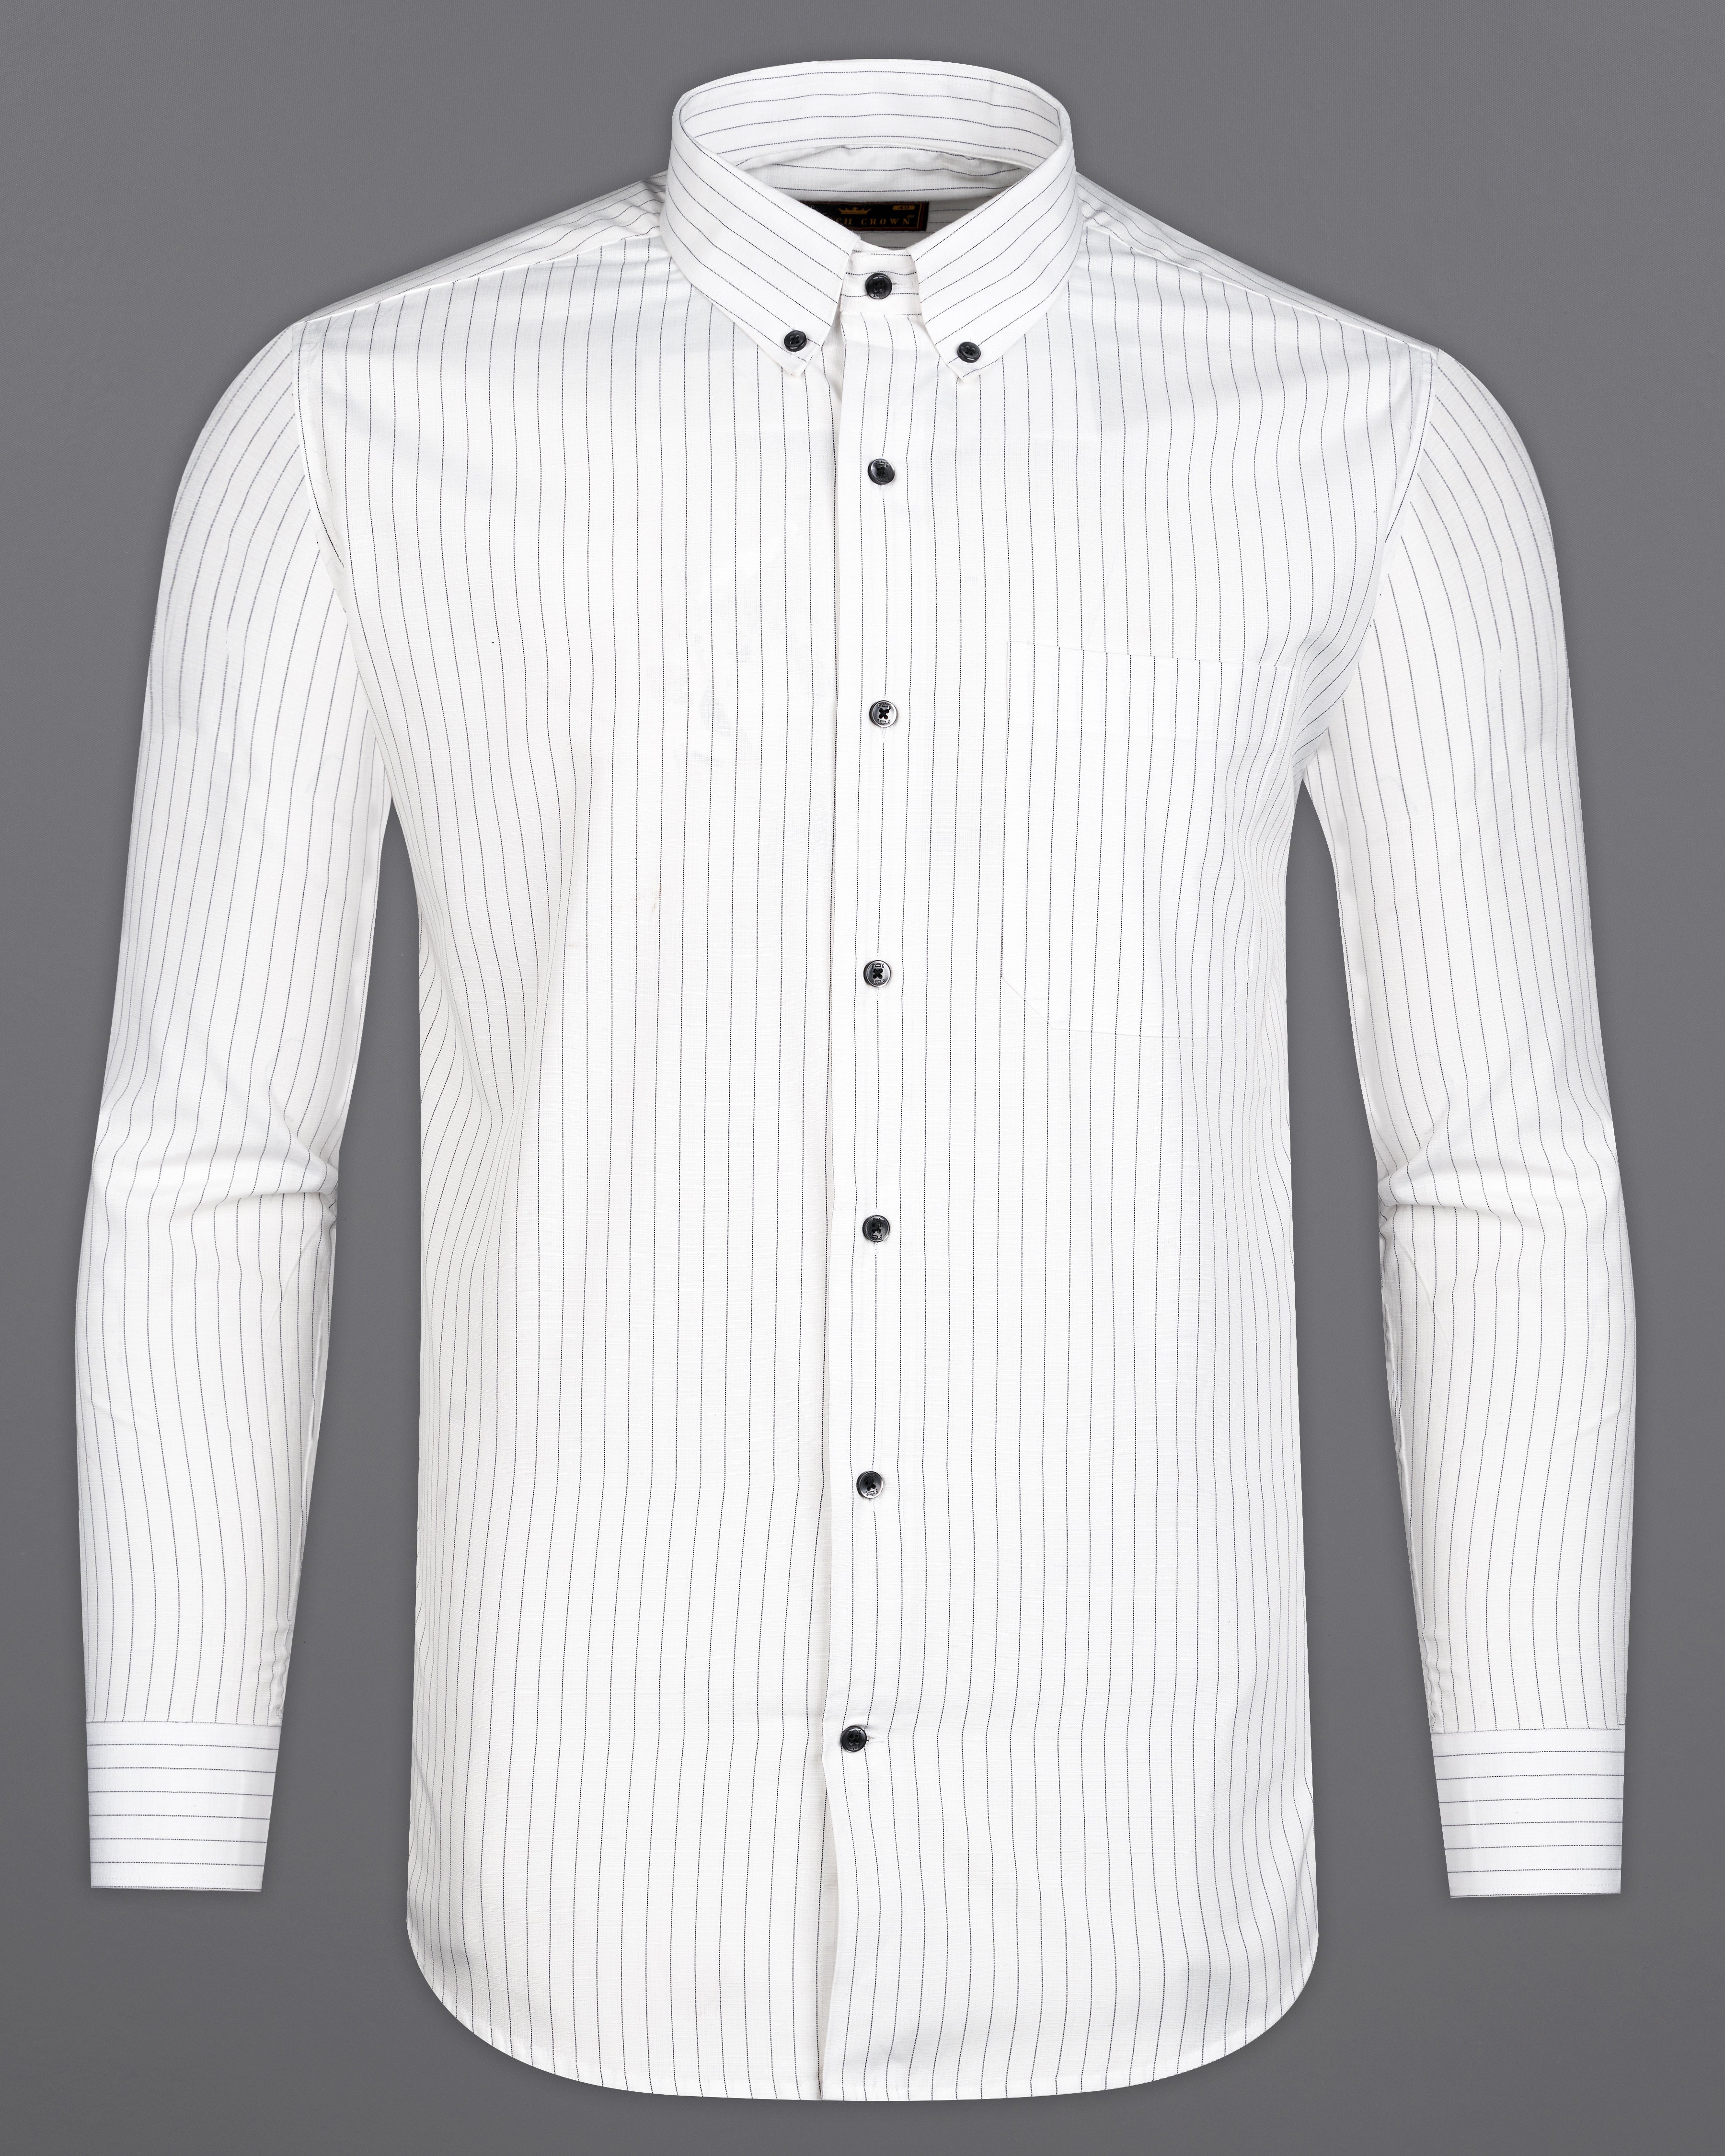 Bright White with Striped Textured Chambray Shirt 9971-BD-BLK-38, 9971-BD-BLK-H-38, 9971-BD-BLK-39, 9971-BD-BLK-H-39, 9971-BD-BLK-40, 9971-BD-BLK-H-40, 9971-BD-BLK-42, 9971-BD-BLK-H-42, 9971-BD-BLK-44, 9971-BD-BLK-H-44, 9971-BD-BLK-46, 9971-BD-BLK-H-46, 9971-BD-BLK-48, 9971-BD-BLK-H-48, 9971-BD-BLK-50, 9971-BD-BLK-H-50, 9971-BD-BLK-52, 9971-BD-BLK-H-52